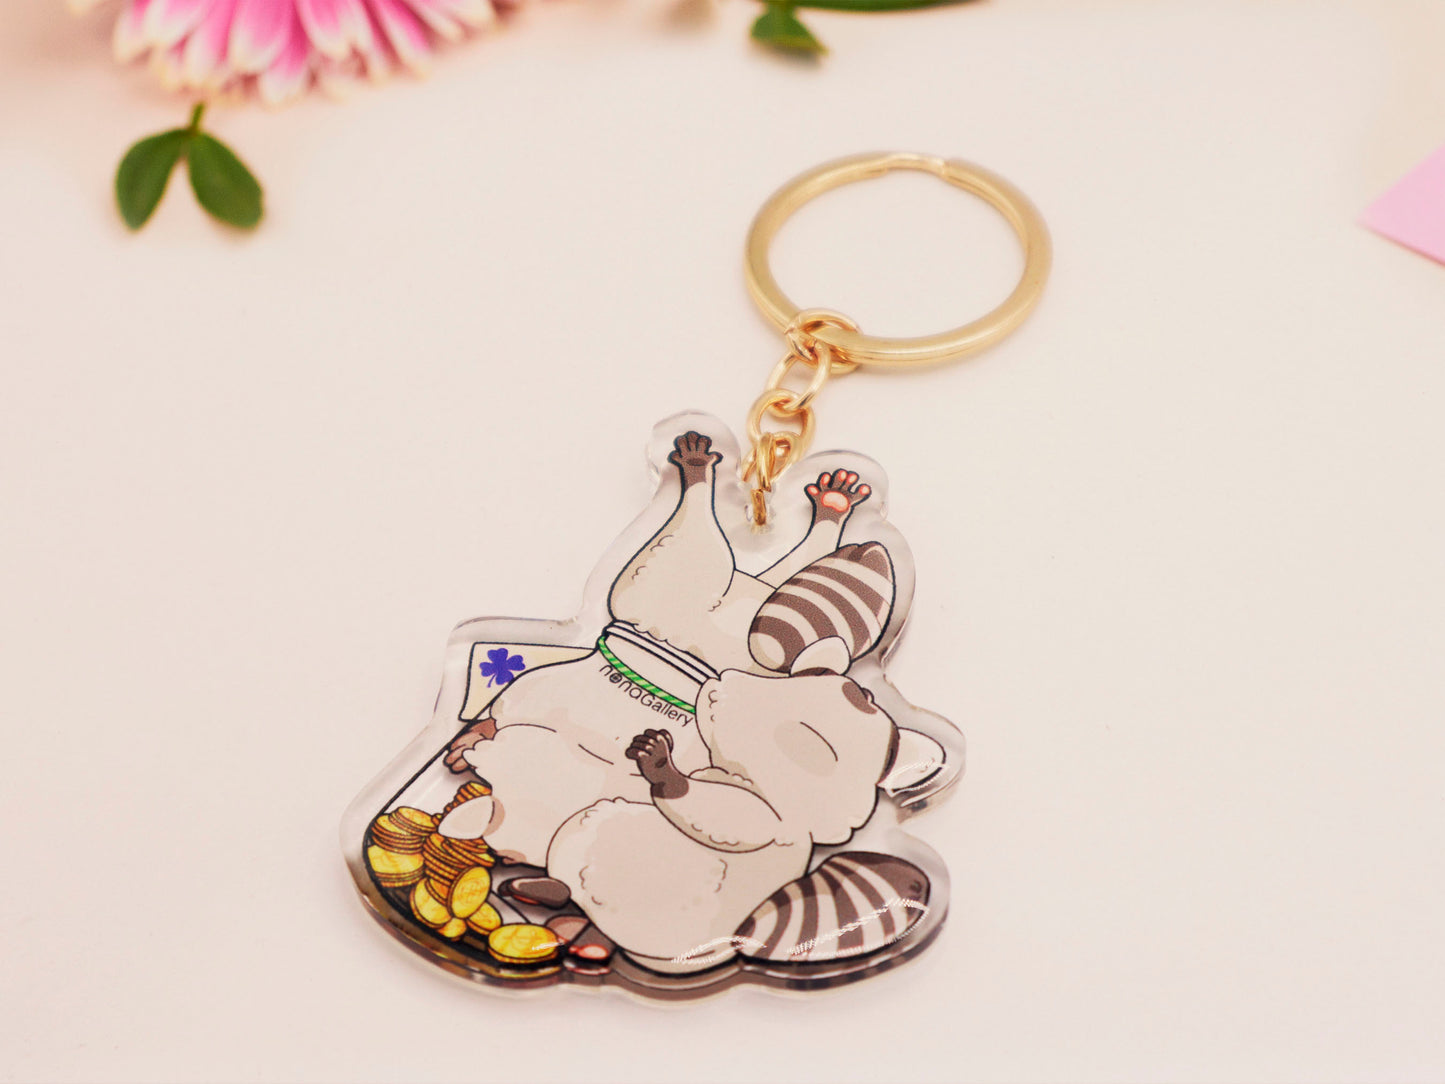 The back of a clear acrylic keychain with gold chain clasp of two cheeky raccoons stealing gold coins from inside a potion bottle labelled potion of good fortune